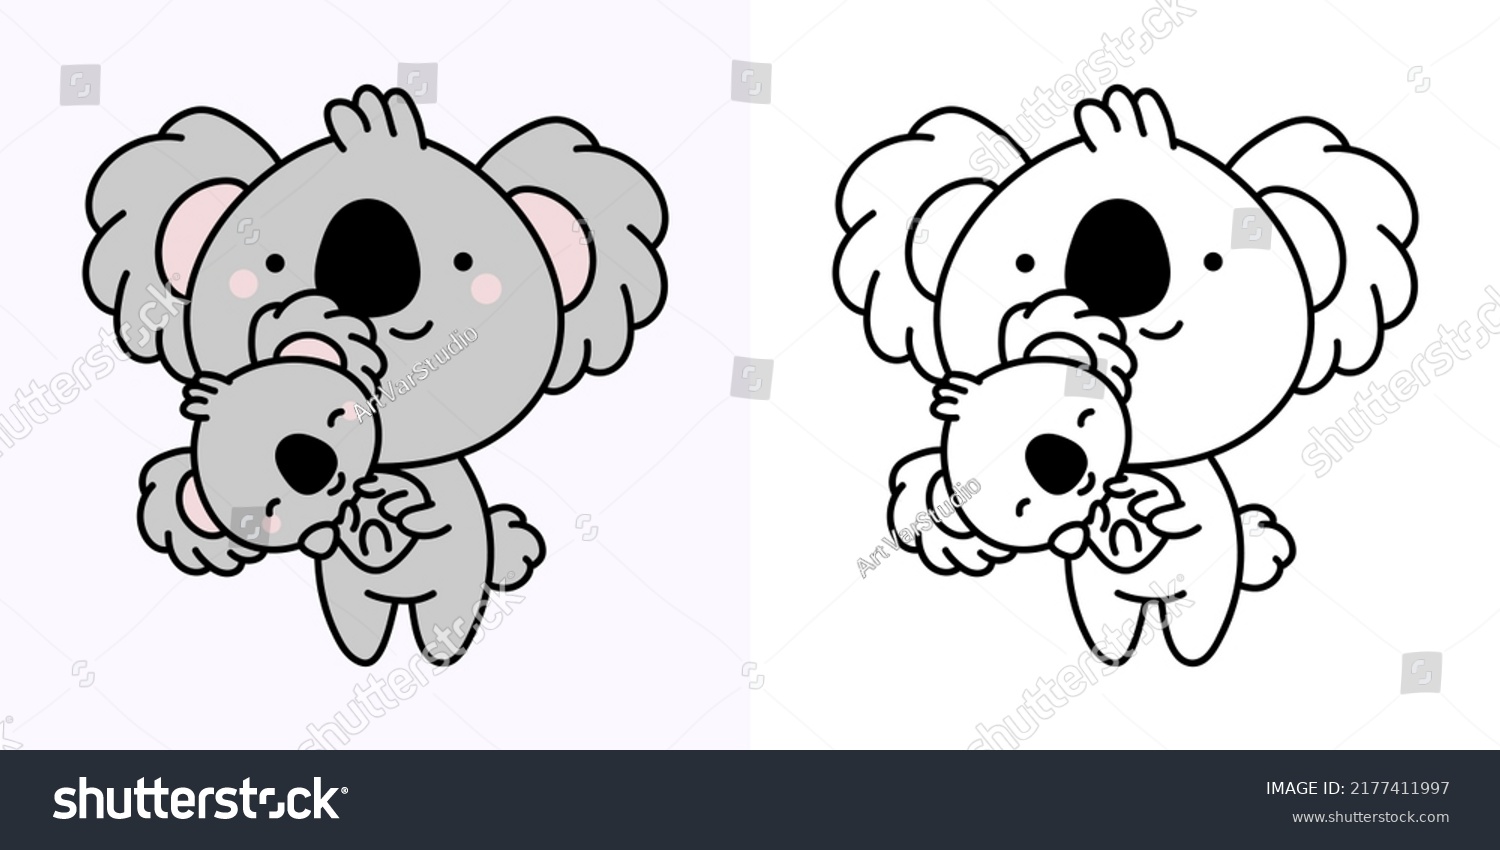 SVG of Cute Clipart Koala Illustration and For Coloring Page. Cartoon Clip Art Koala. Vector Illustration of a Kawaii Animal for Stickers, Baby Shower, Coloring Pages, Prints for Clothes.  svg